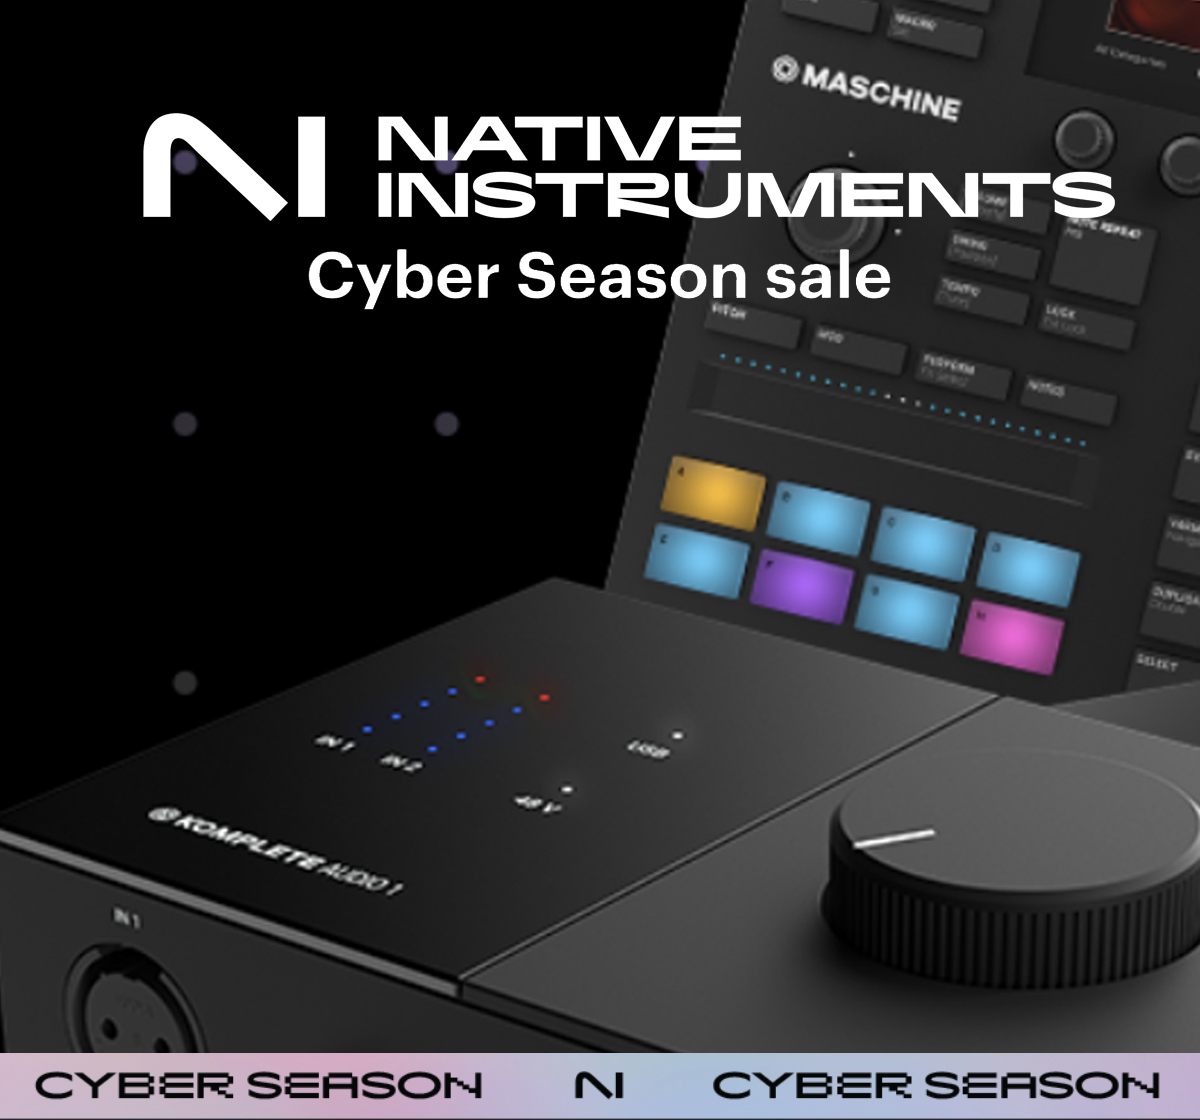 NATIVE INSTRUMENTS CYBER SALE